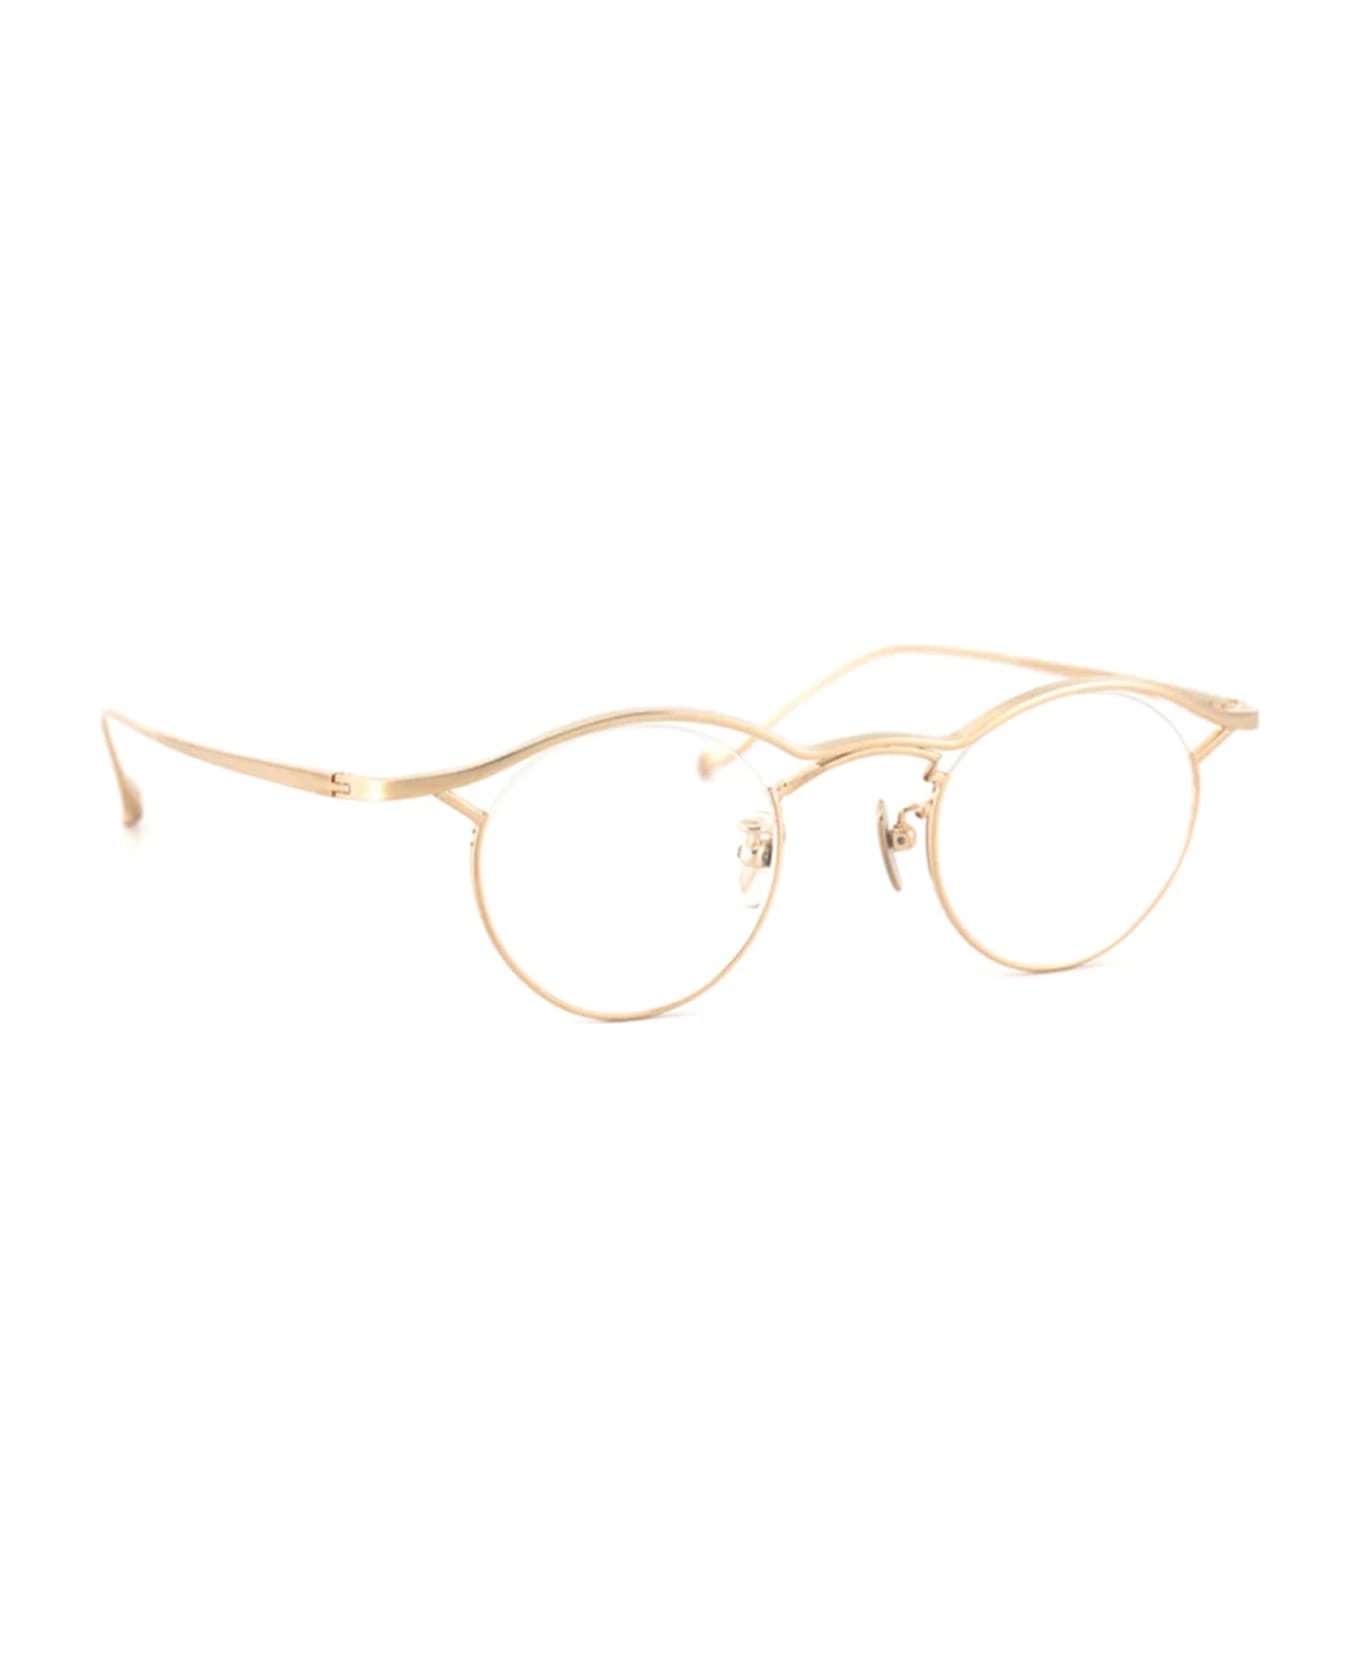 FACTORY900 Titanos X Factory900 Mf-001 - Gold Rx Glasses - Gold